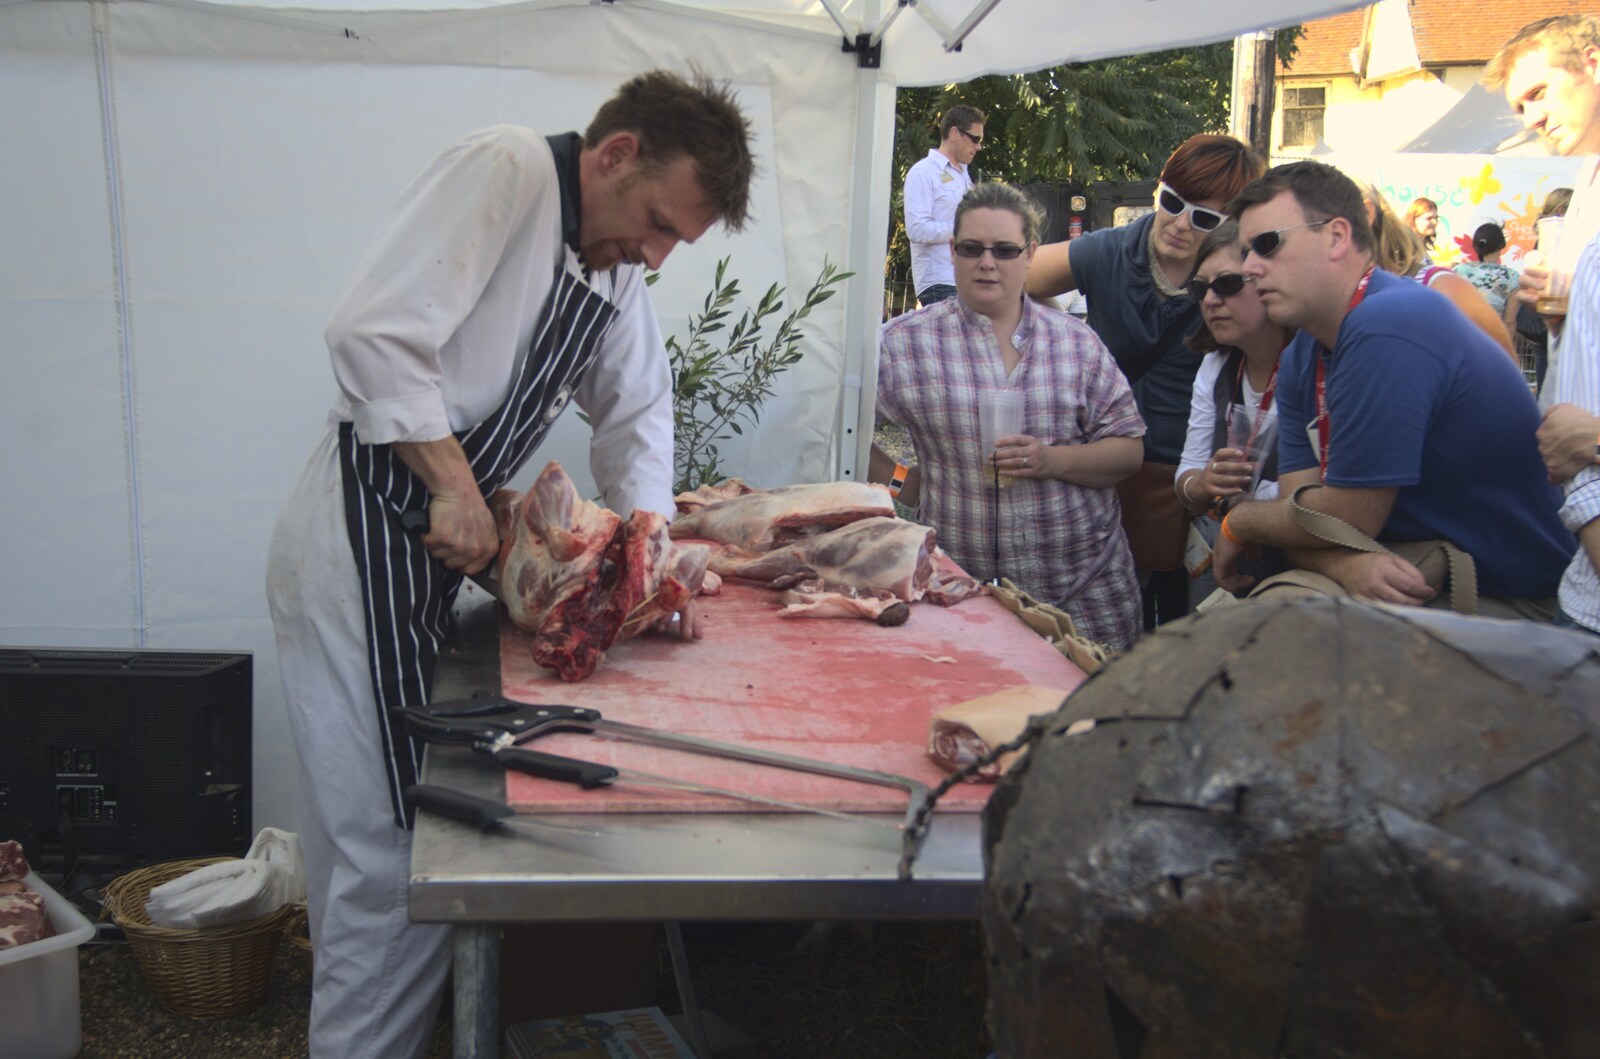 A butchery demonstration is occuring from Harvest Festival at Jimmy's Farm, Wherstead, Suffolk - 12th September 2009